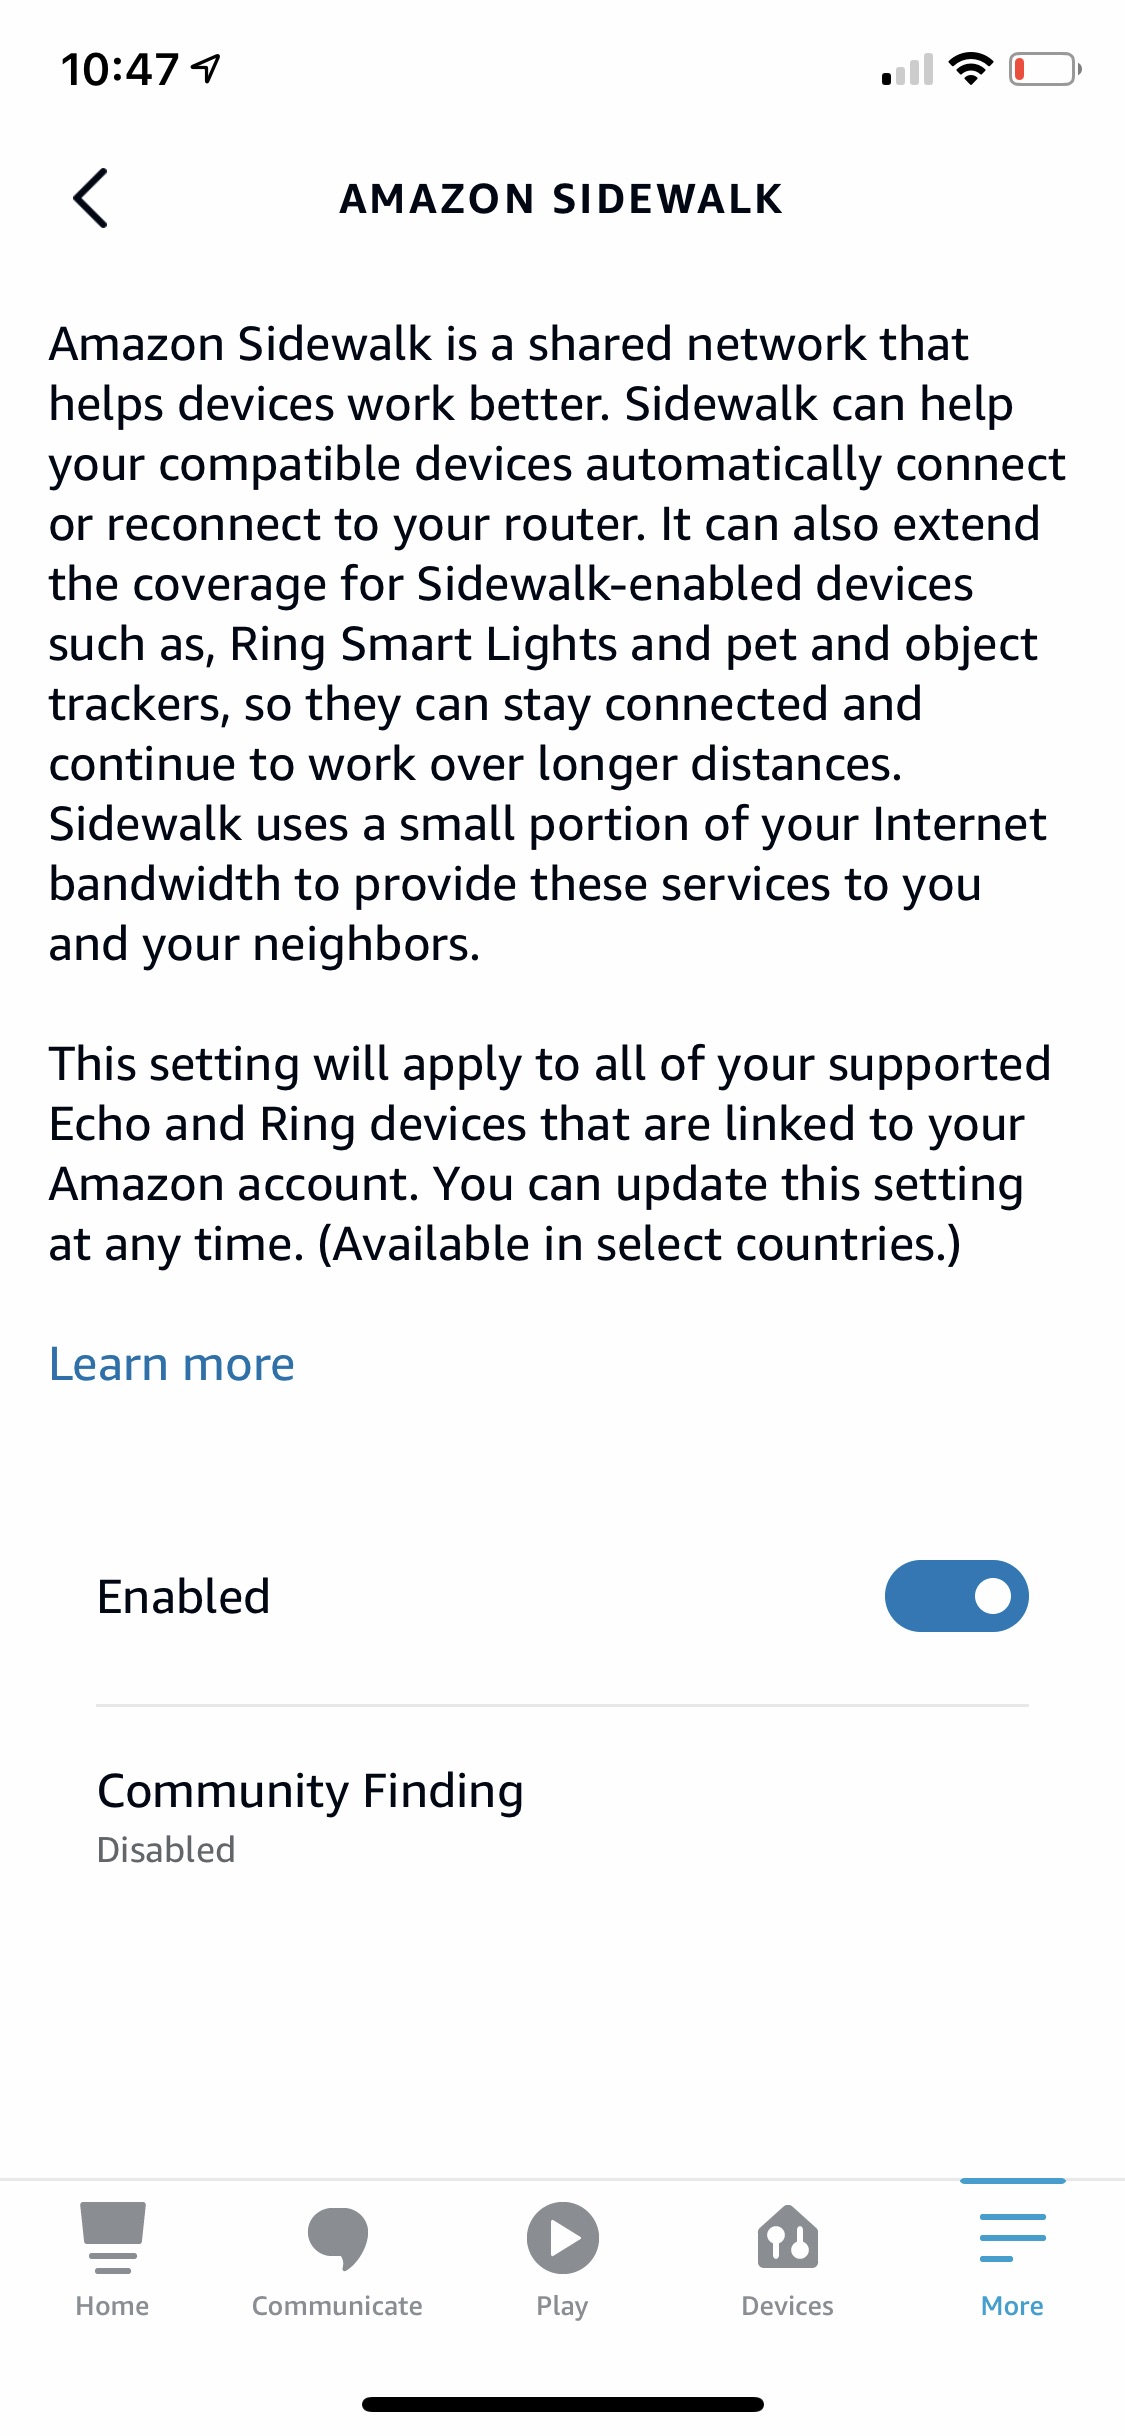 Amazon Started Sharing Your Internet Connection Today, Here's How to Turn It Off